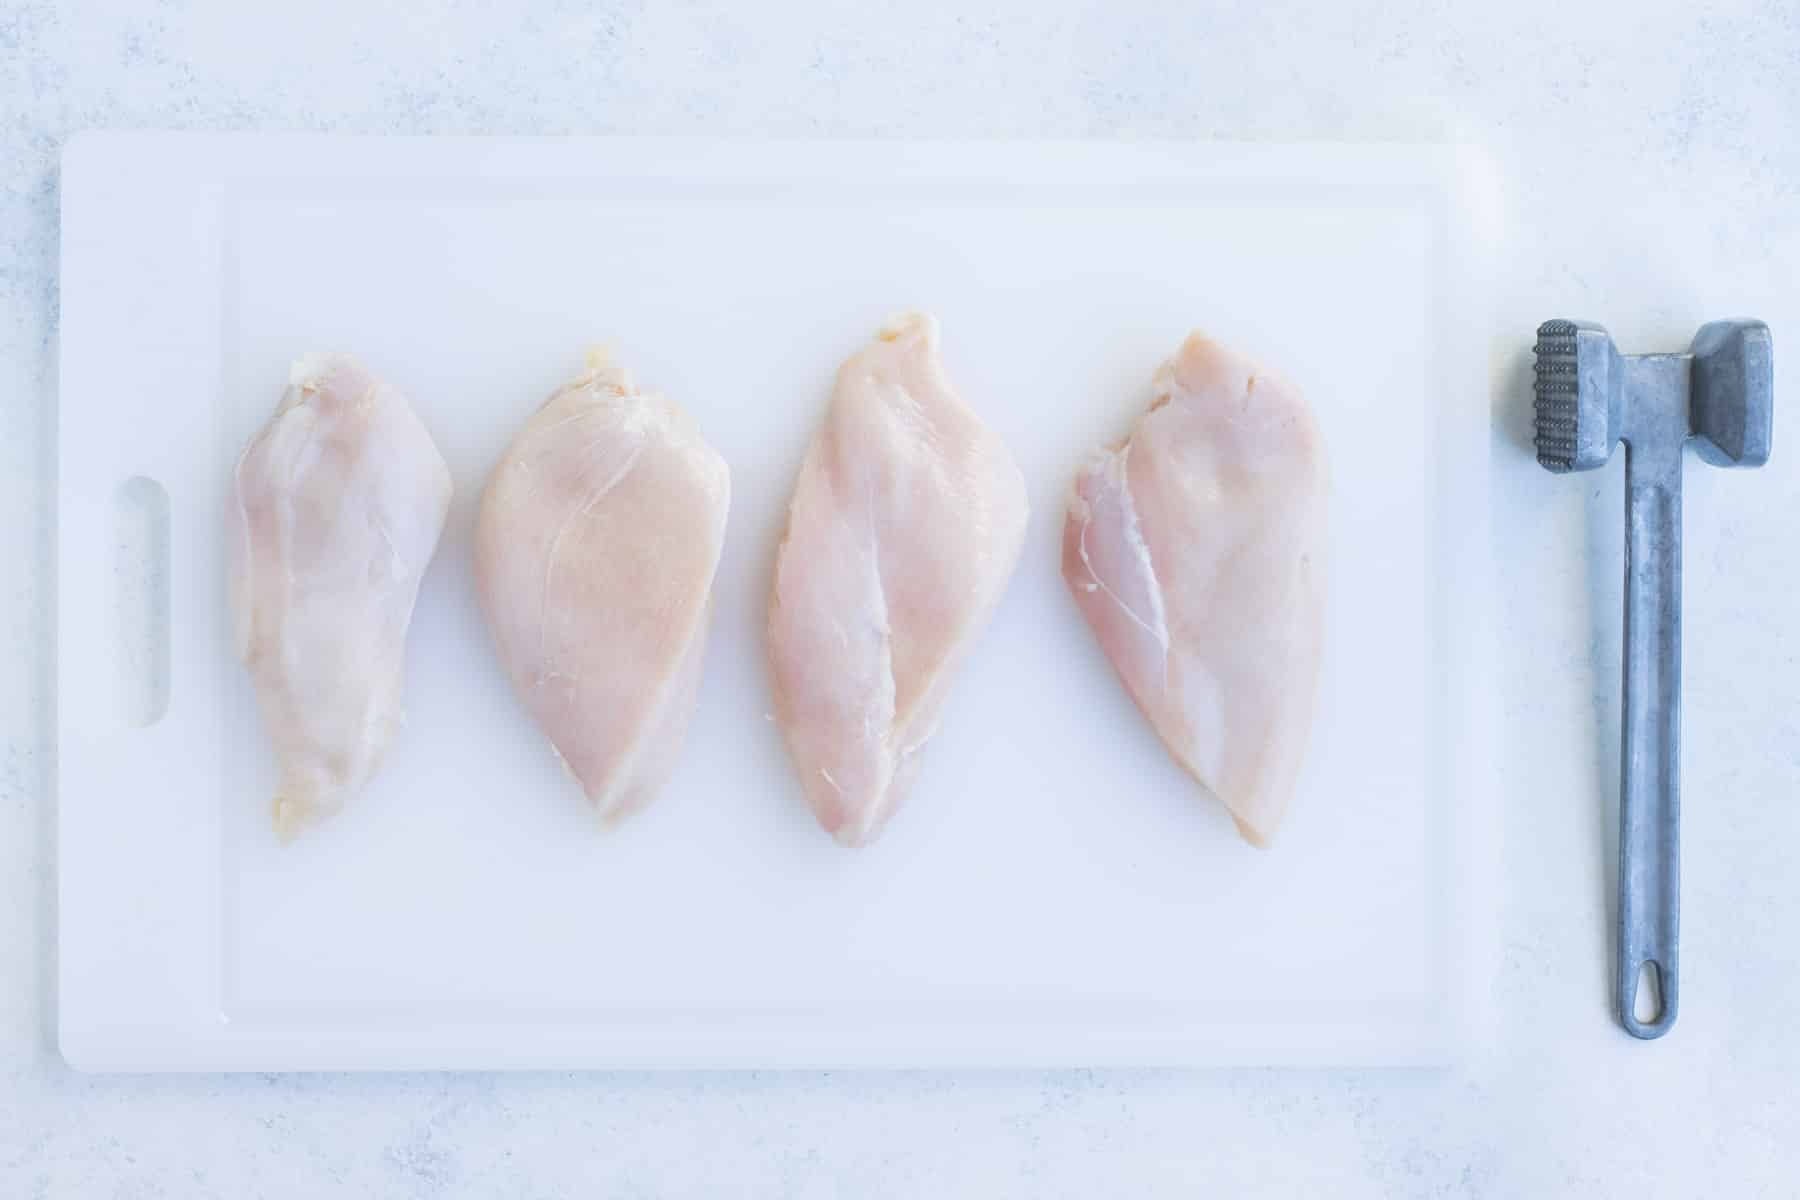 Chicken breasts are pounded into 1 inch thick.